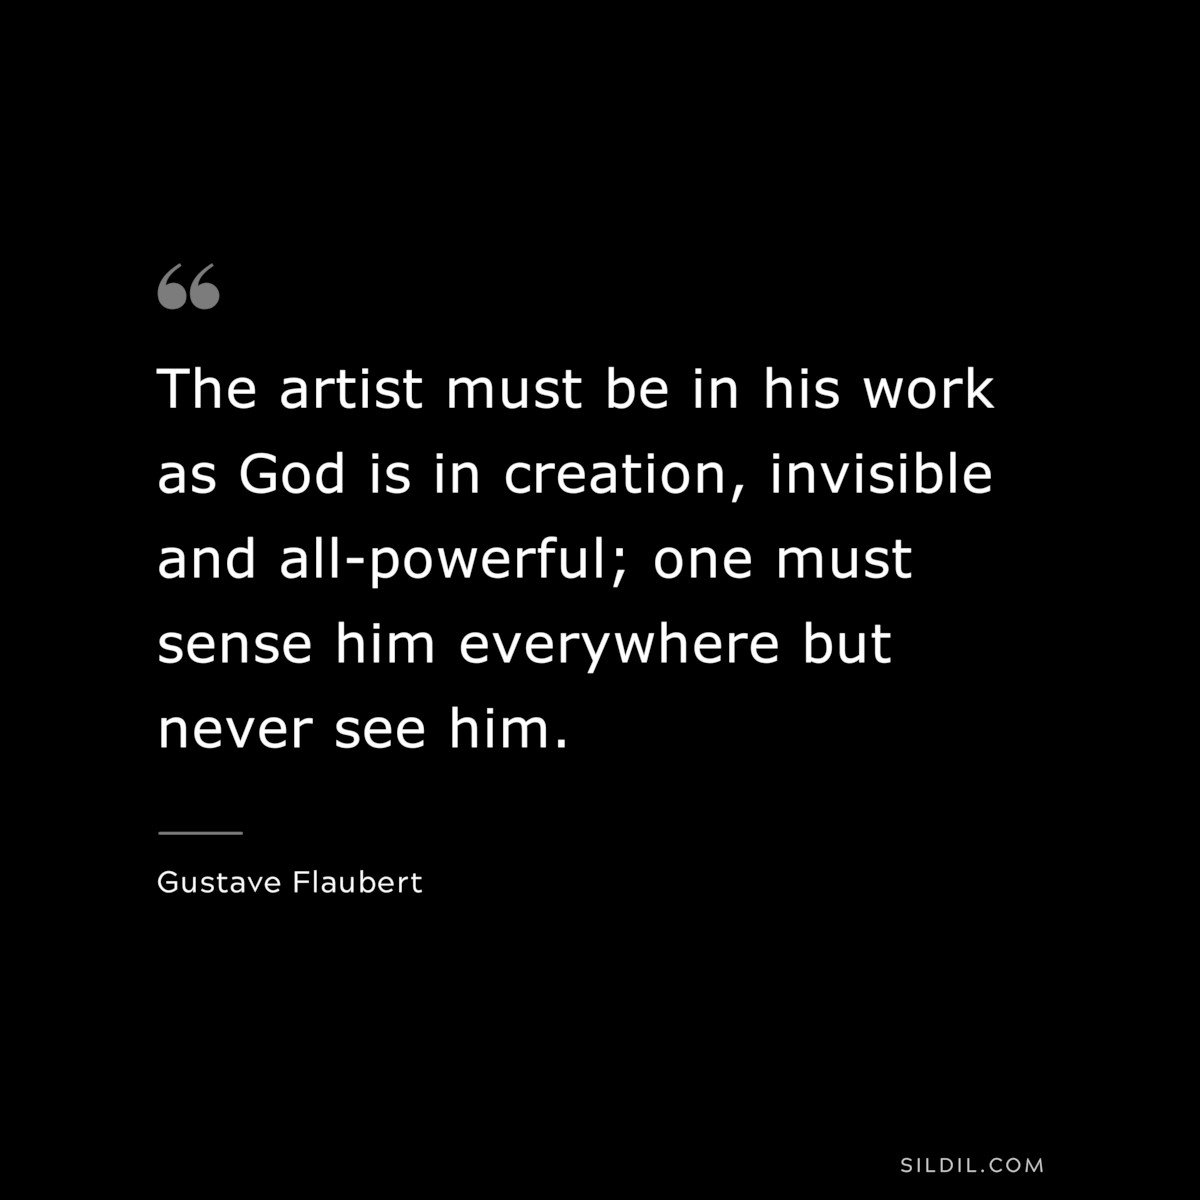 The artist must be in his work as God is in creation, invisible and all-powerful; one must sense him everywhere but never see him. ― Gustave Flaubert